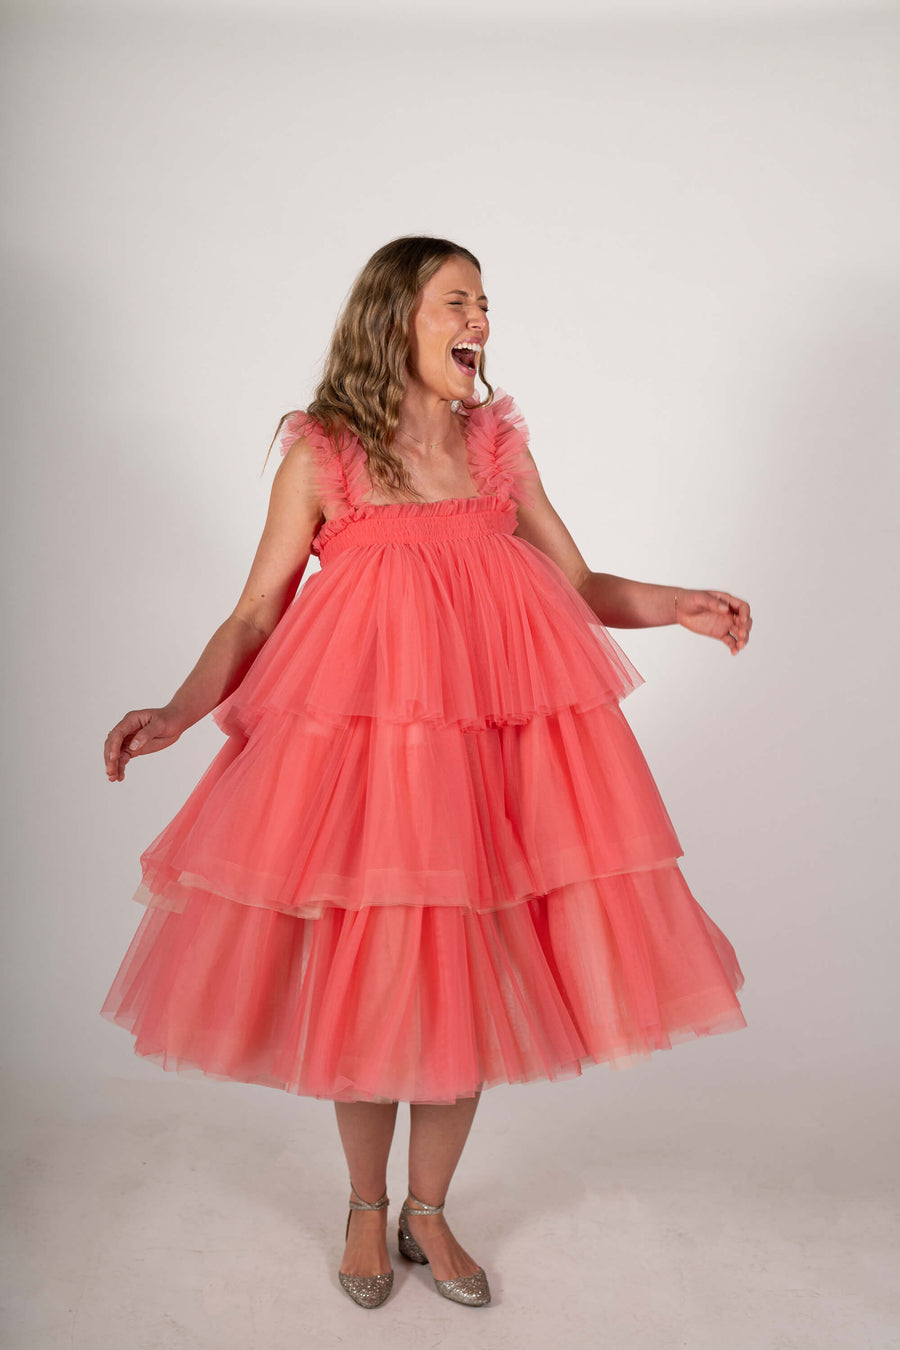 Model laughs while twirling in the Mariposa Tulle Midi dress in pink sorbet by House of Campbell.